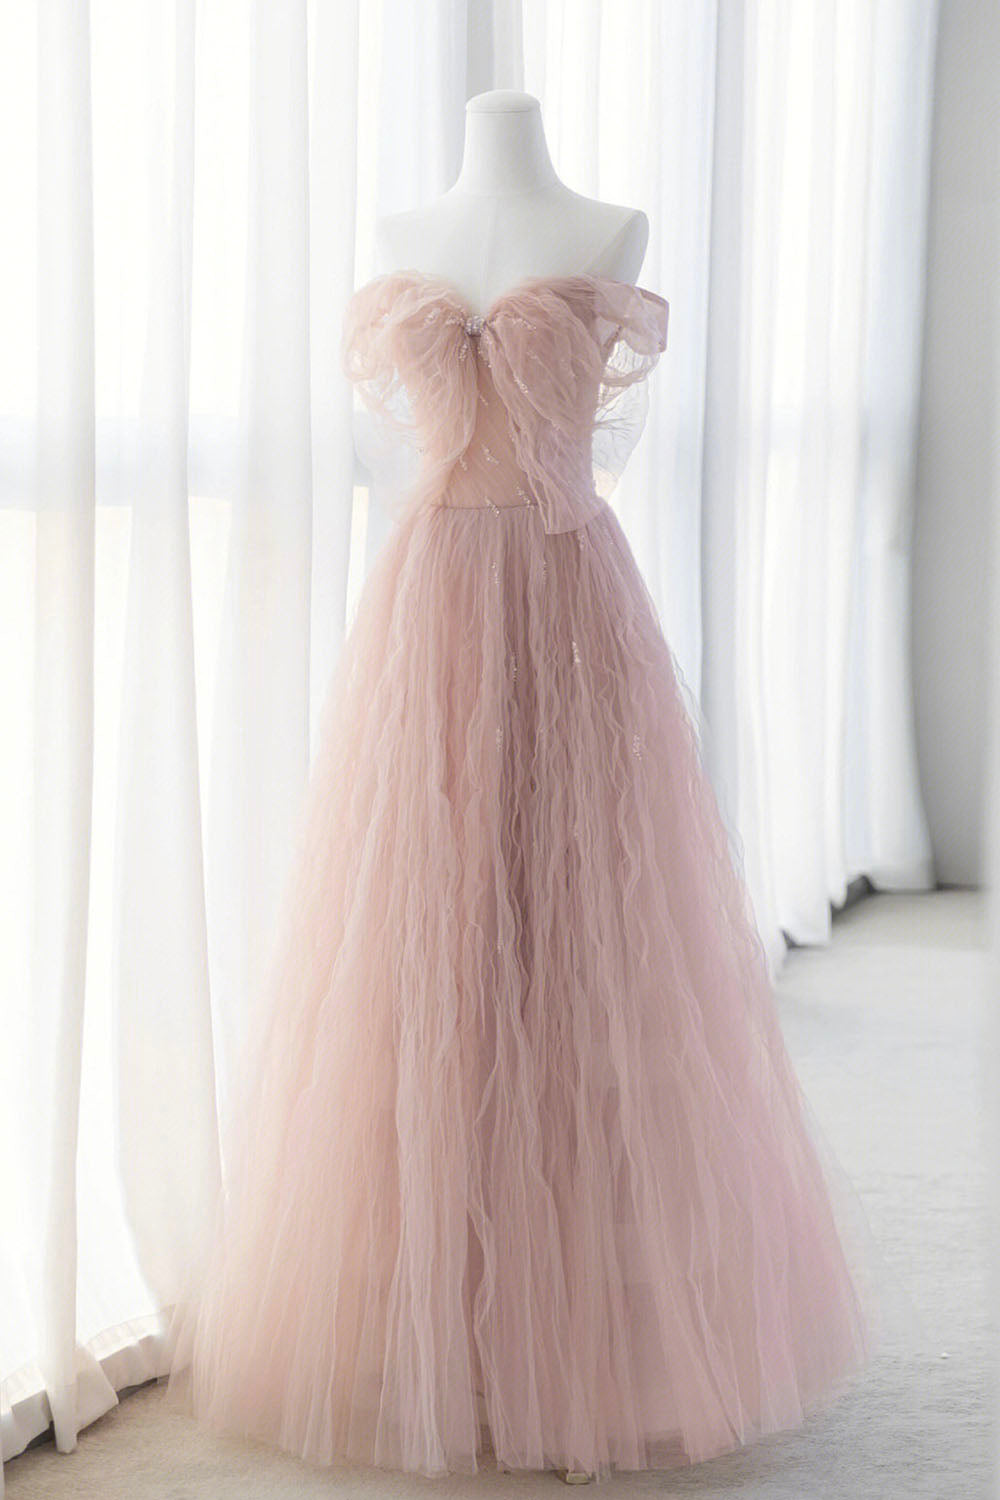 Pink Tulle Long A-Line Prom Dresses, Pink Evening Dresses with Bow